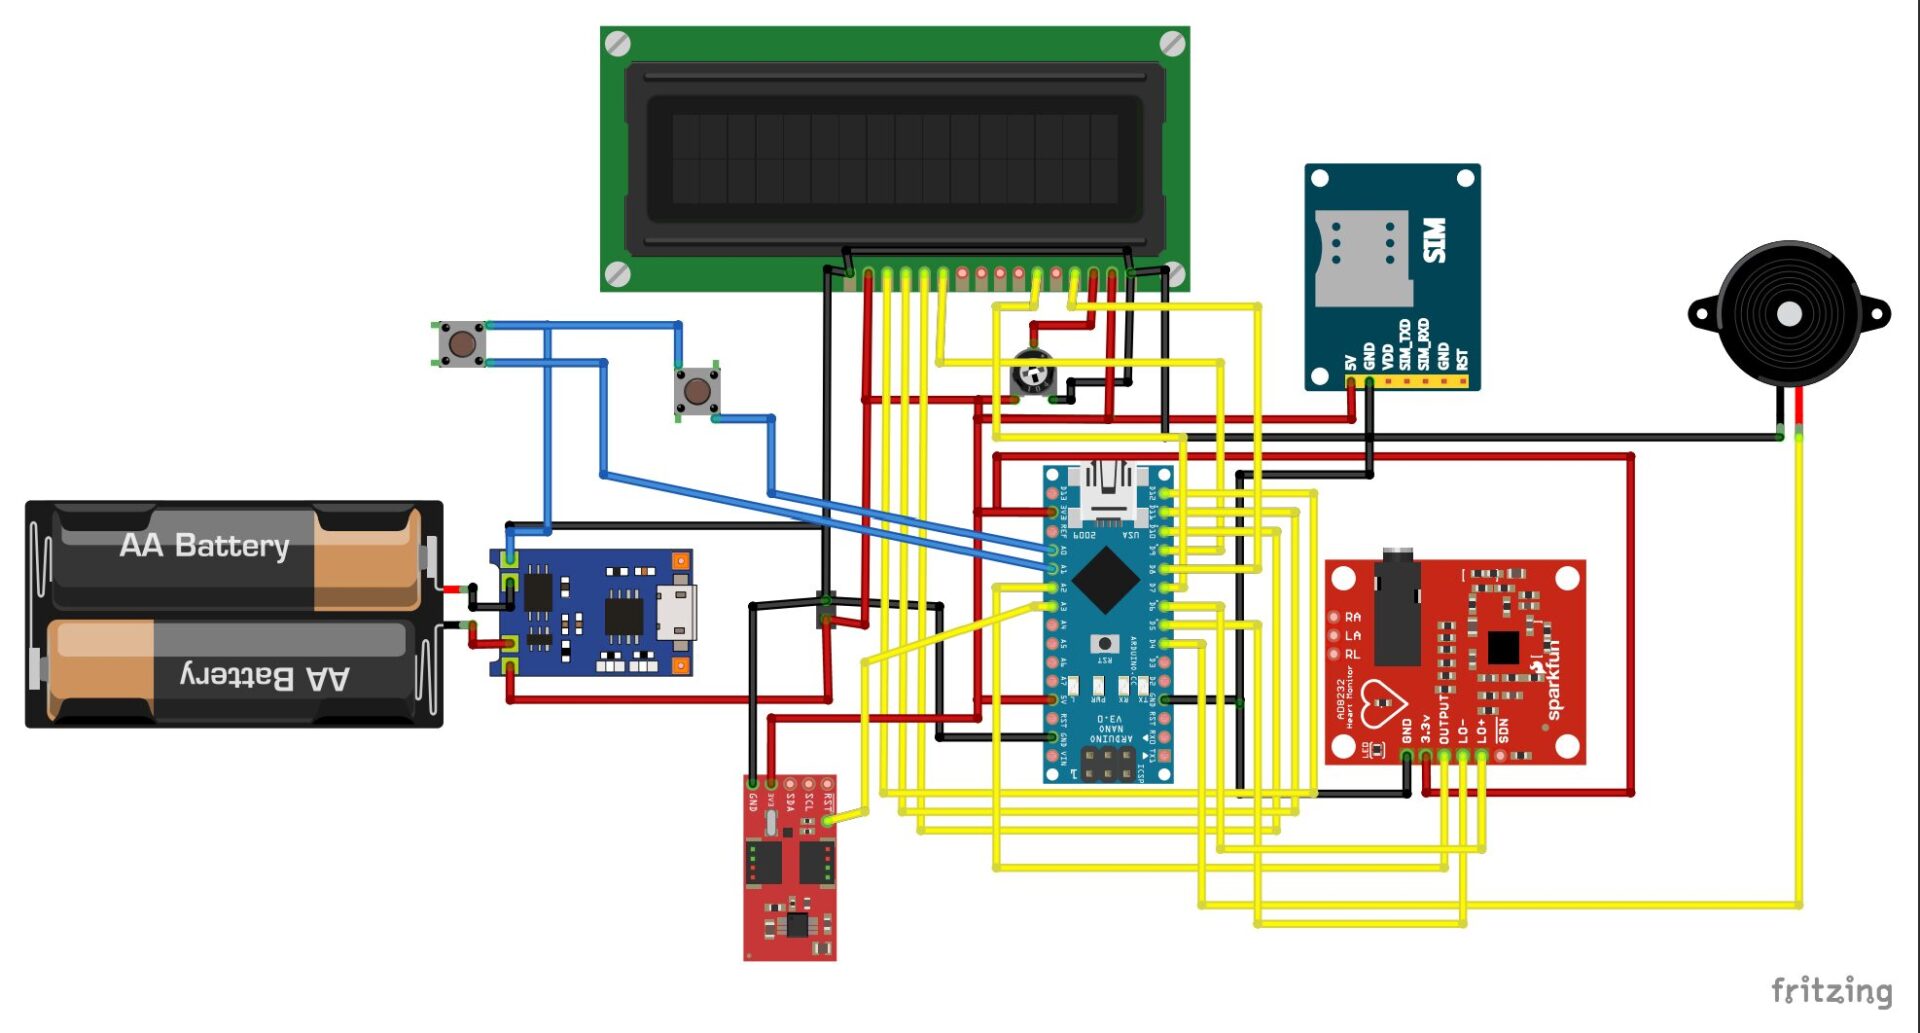 IoT Health Monitoring System: The schematic diagram